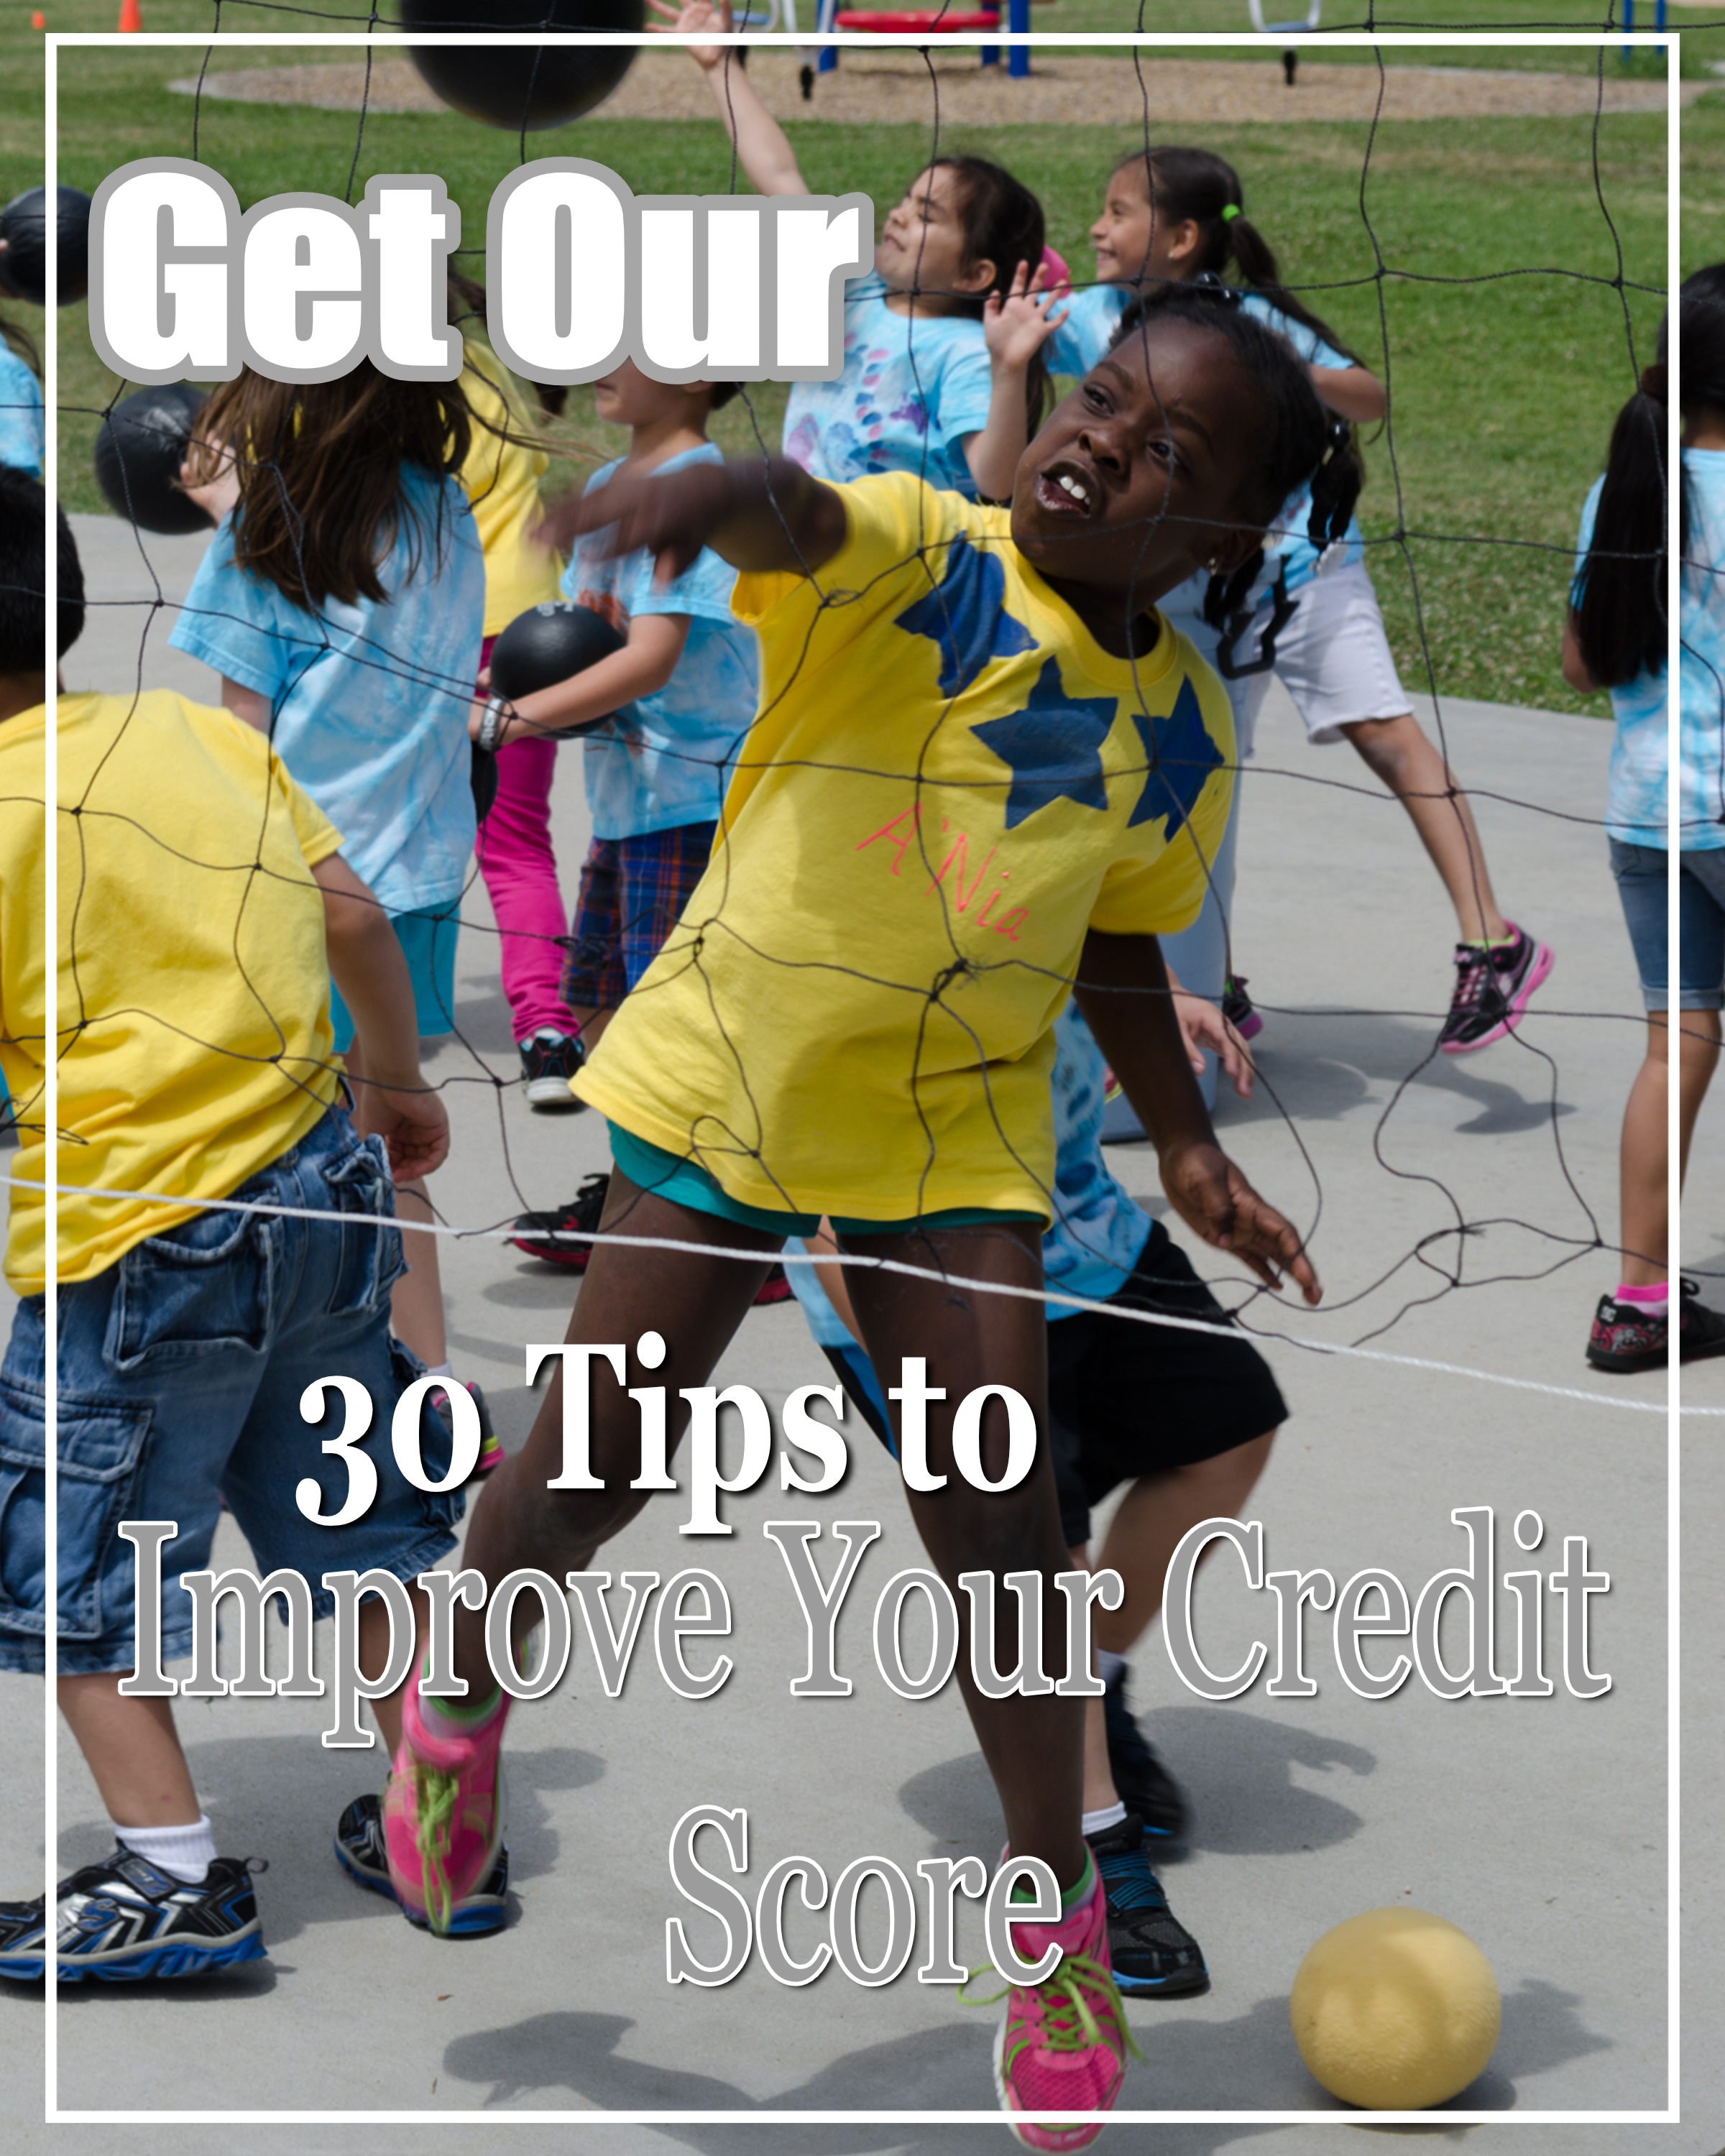 30 Tips to Improve Your Credit Score